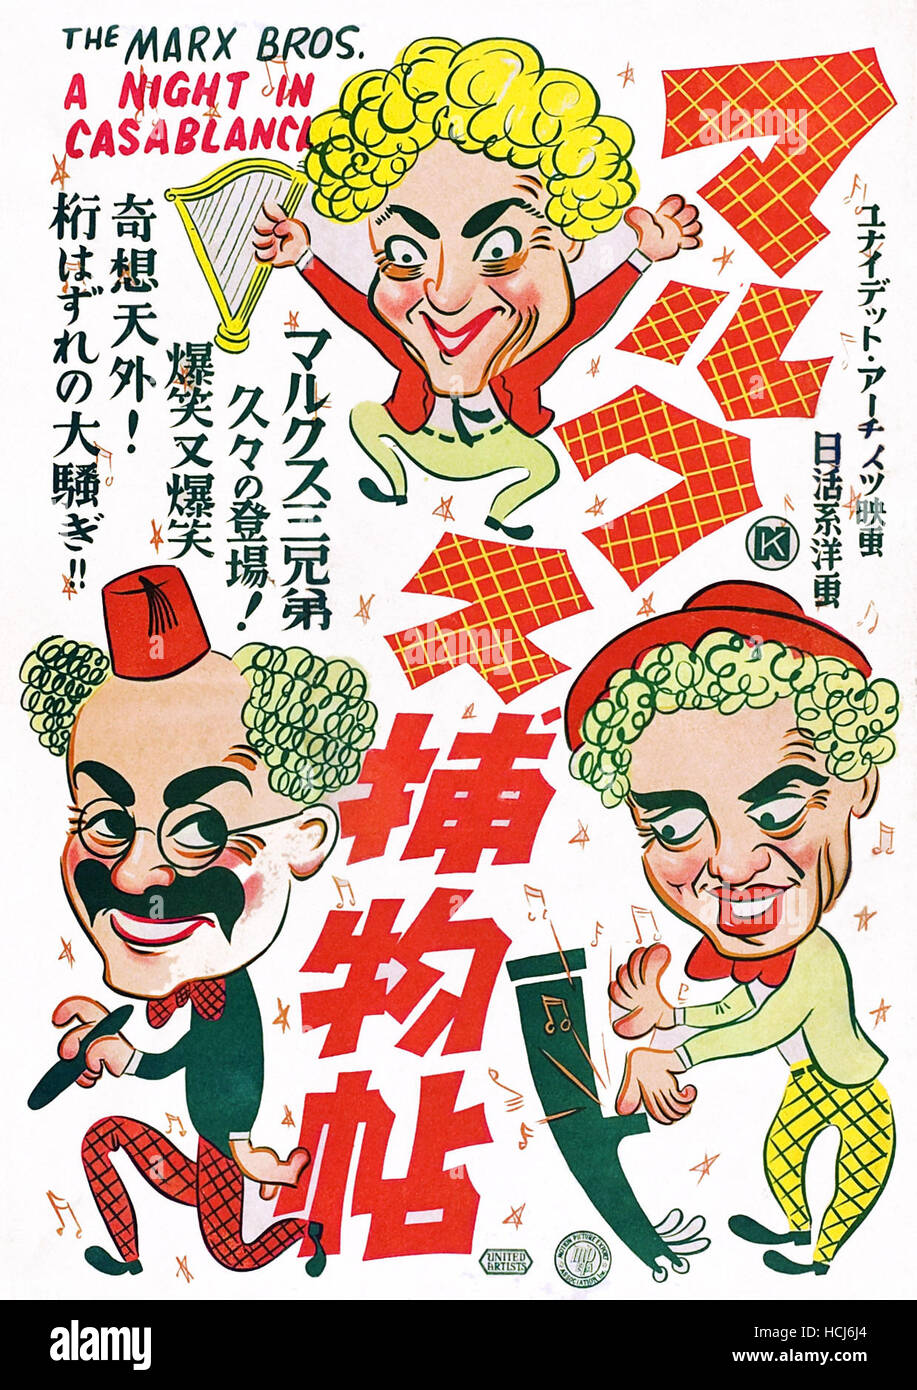 A NIGHT IN CASABLANCA, The Marx Brothers, l-r: Groucho Marx, Harpo Marx, Chico Marx on Japanese poster art, 1946. Stock Photo